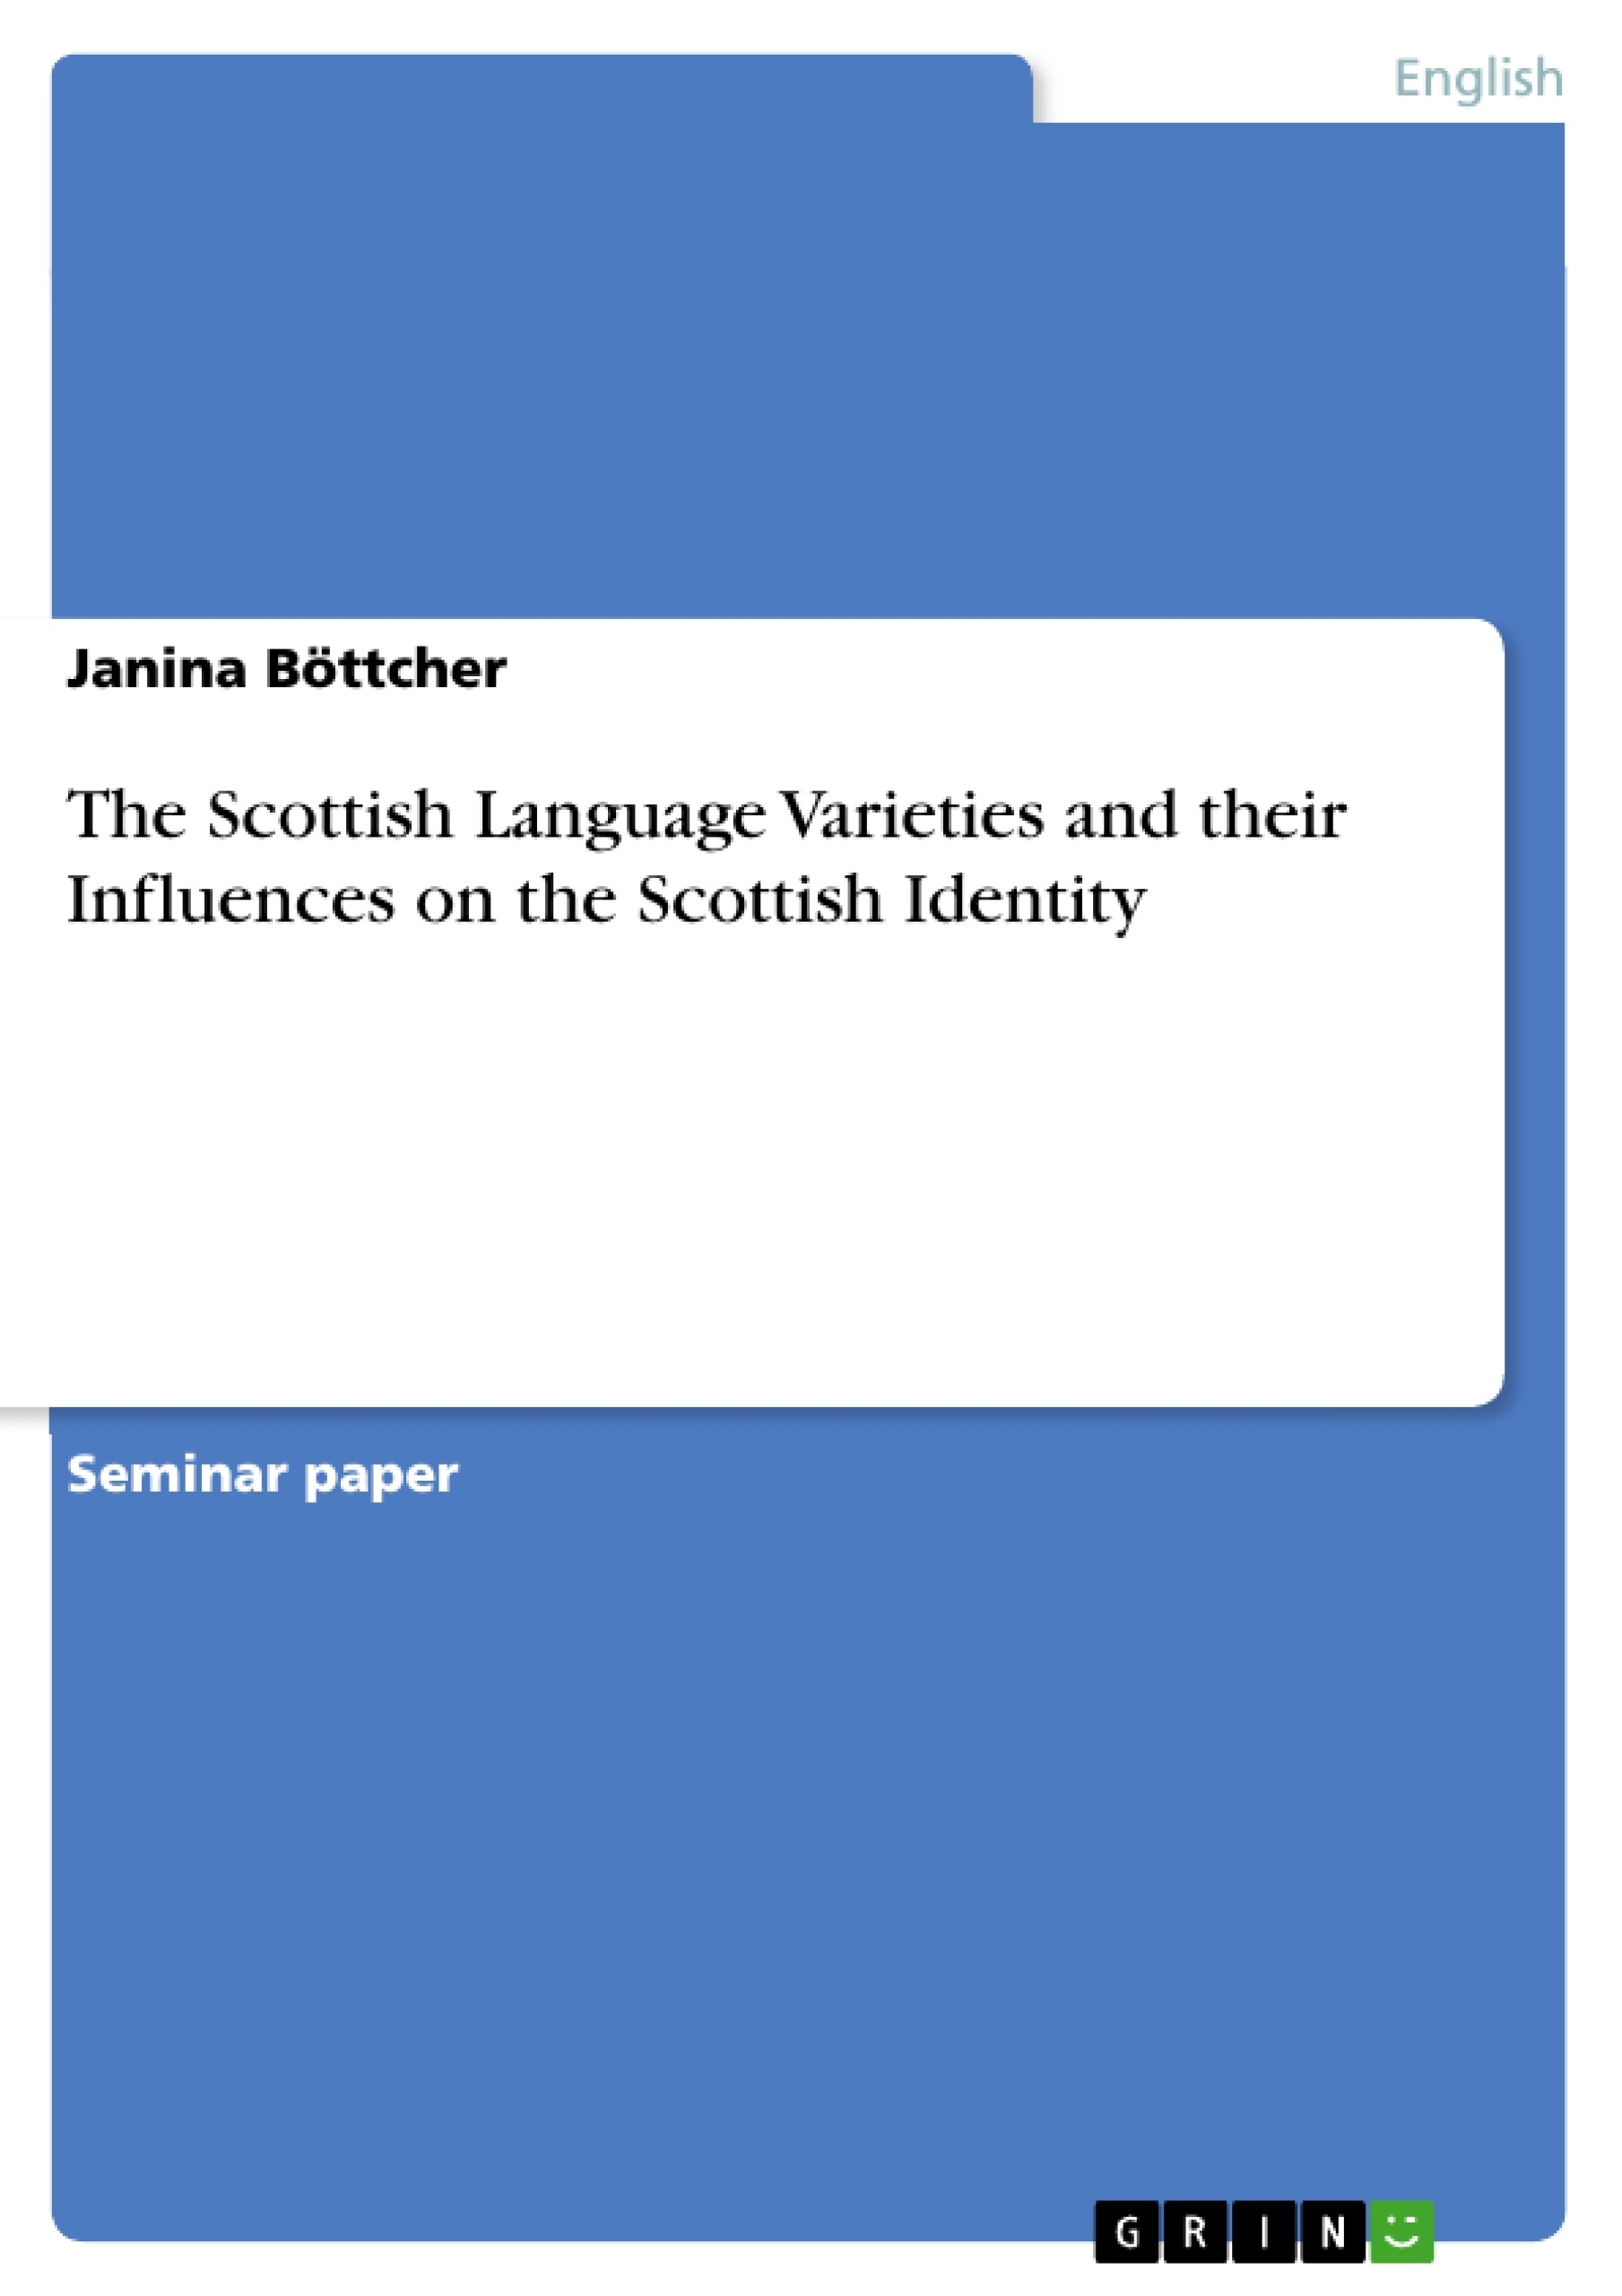 Titre: The Scottish Language Varieties and their Influences on the Scottish Identity